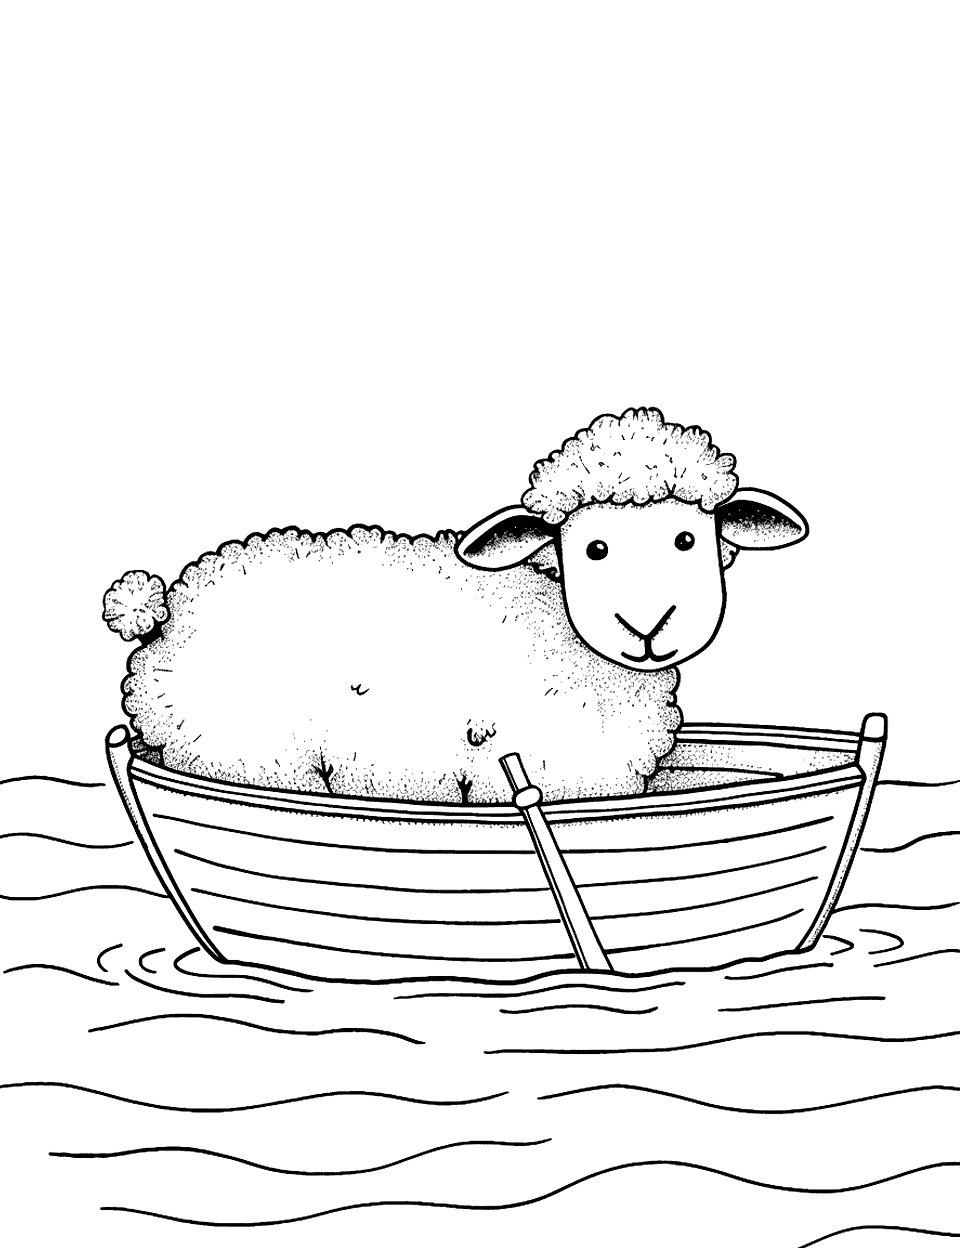 Sheep in a Boat Coloring Page - A sheep rowing a small boat in a calm pond.